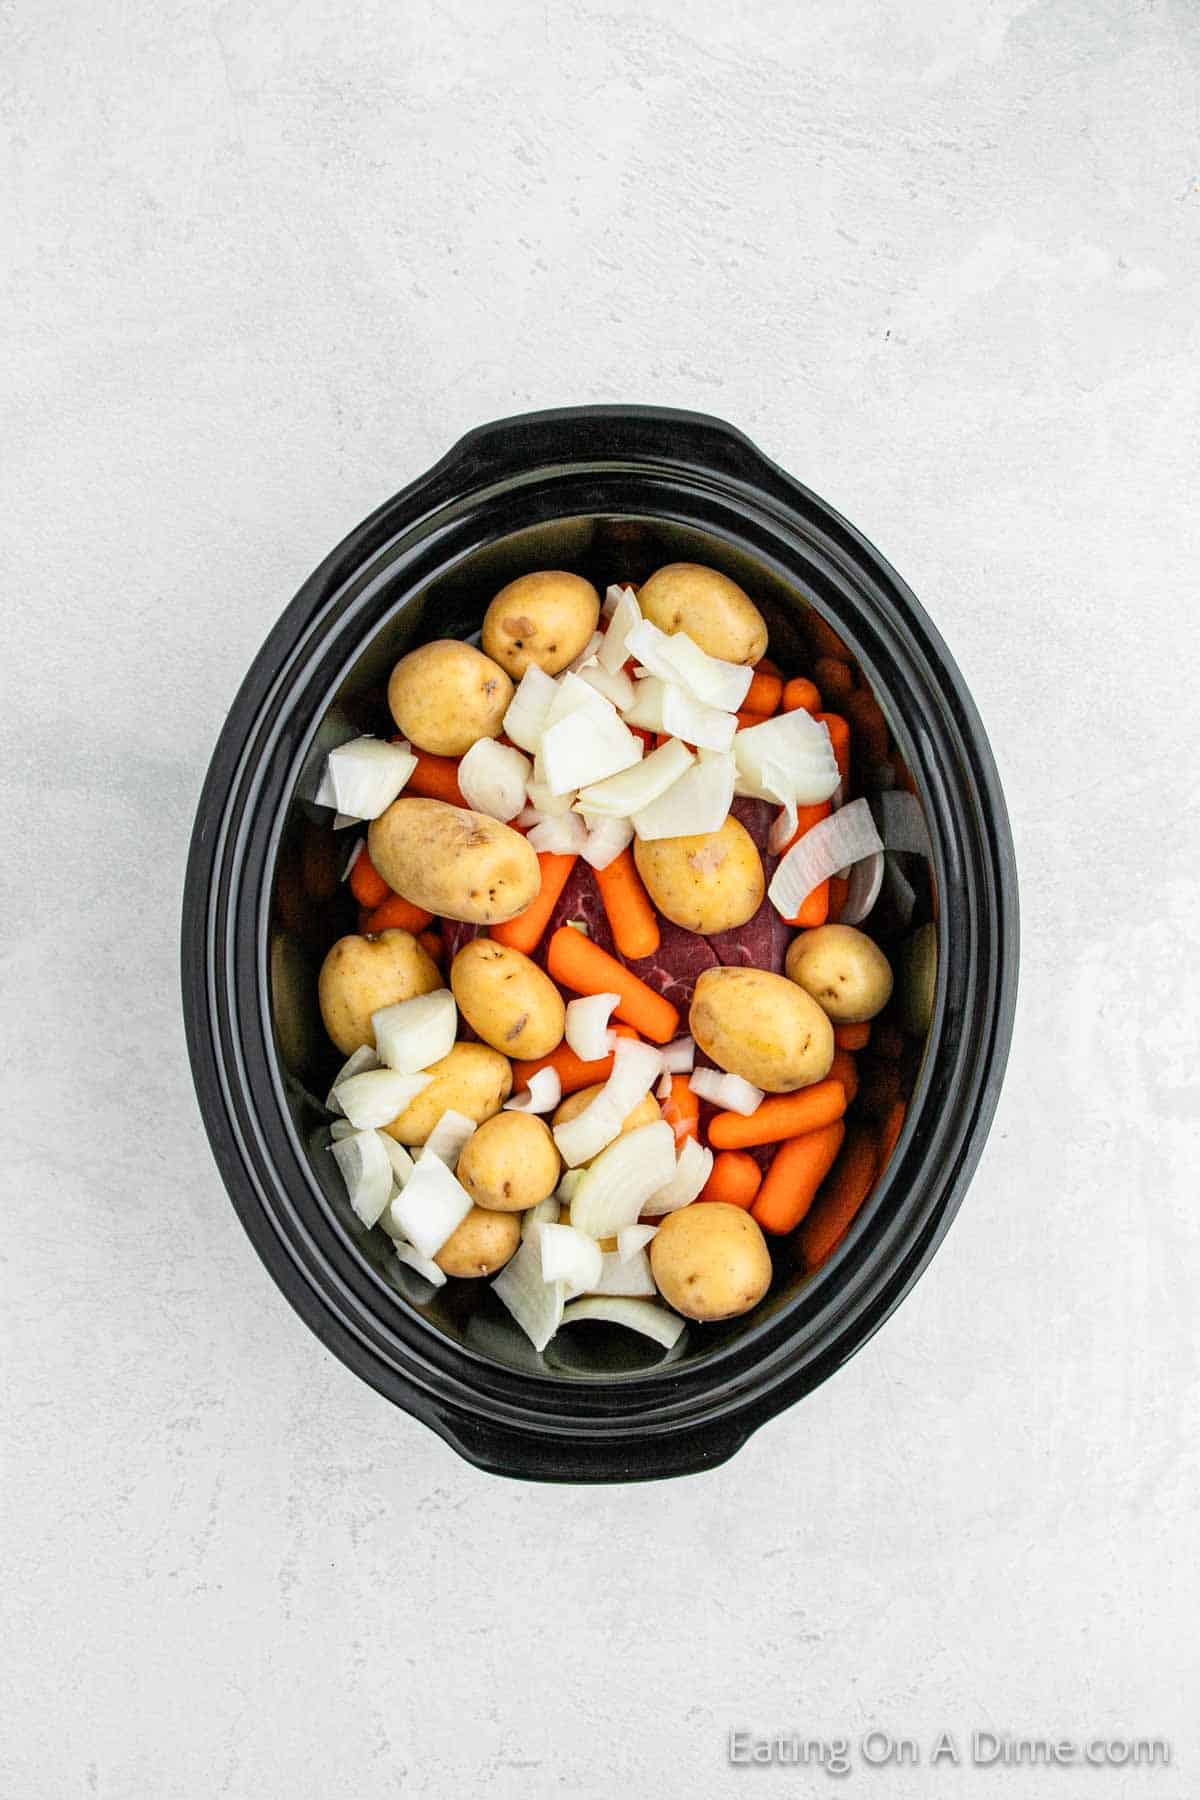 Placing roast, carrots, onions and potatoes in the crock pot